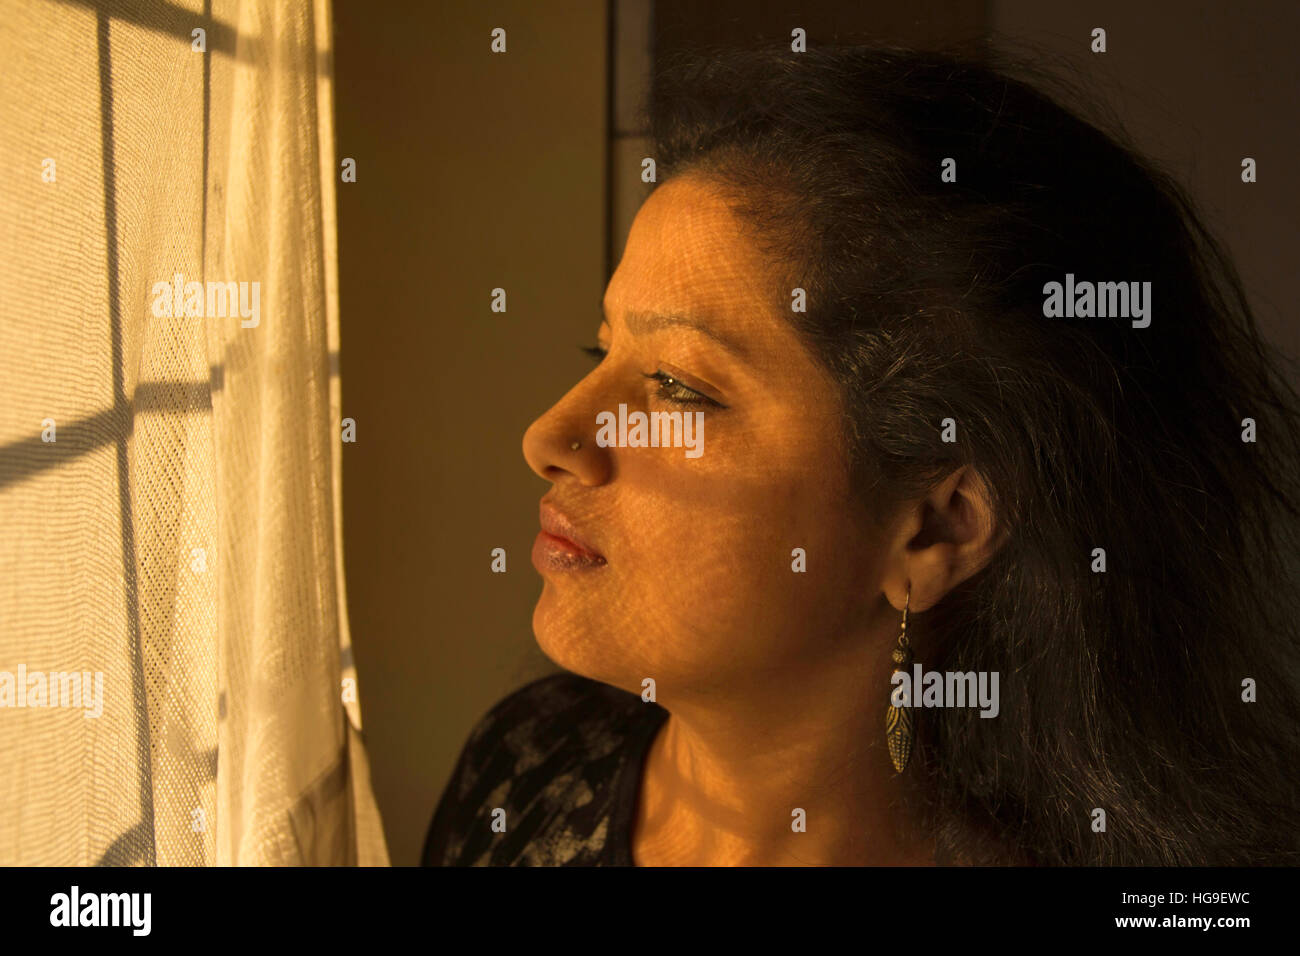 Young Indian woman looking at window with golden light on her face Stock Photo